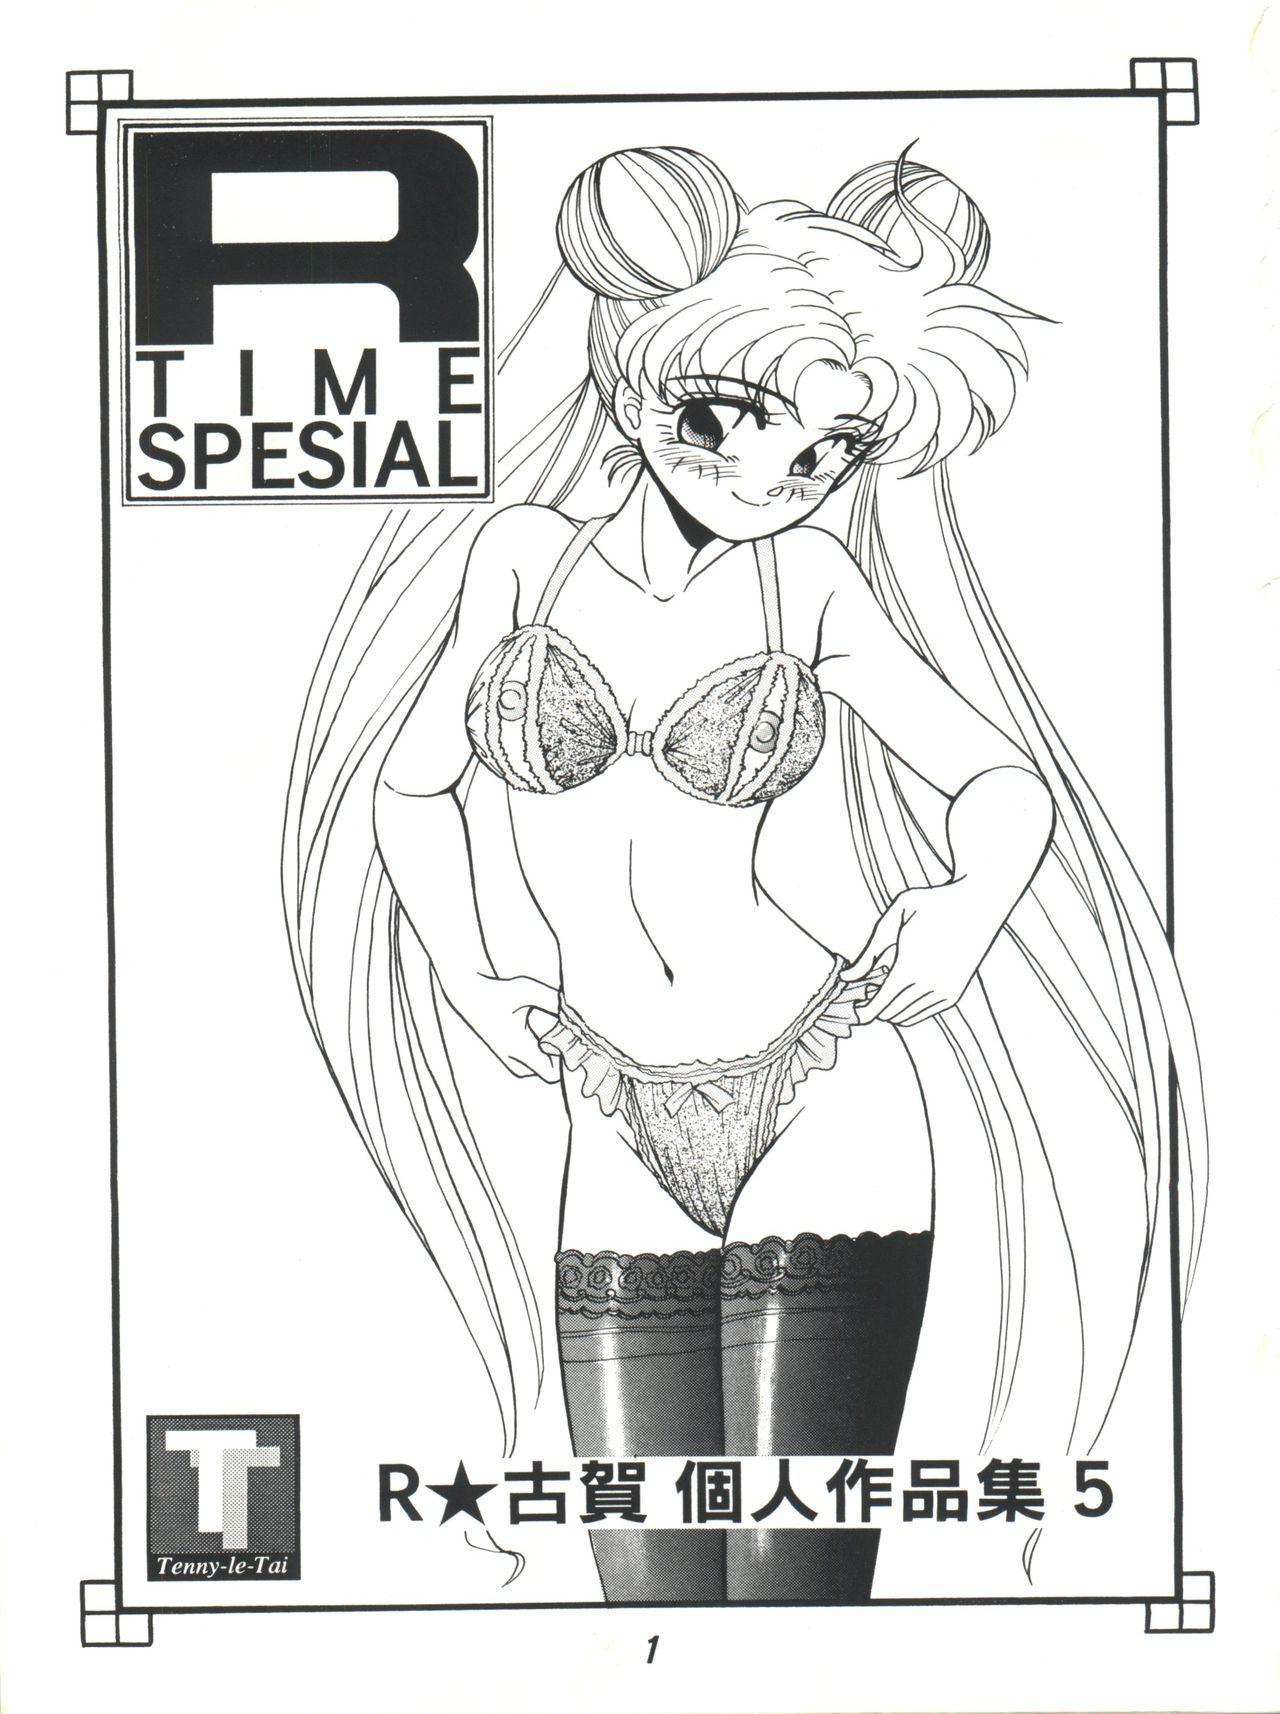 Teenfuns R Time Special - Sailor moon Ranma 12 3x3 eyes Obi wo gyuttone Student - Page 3